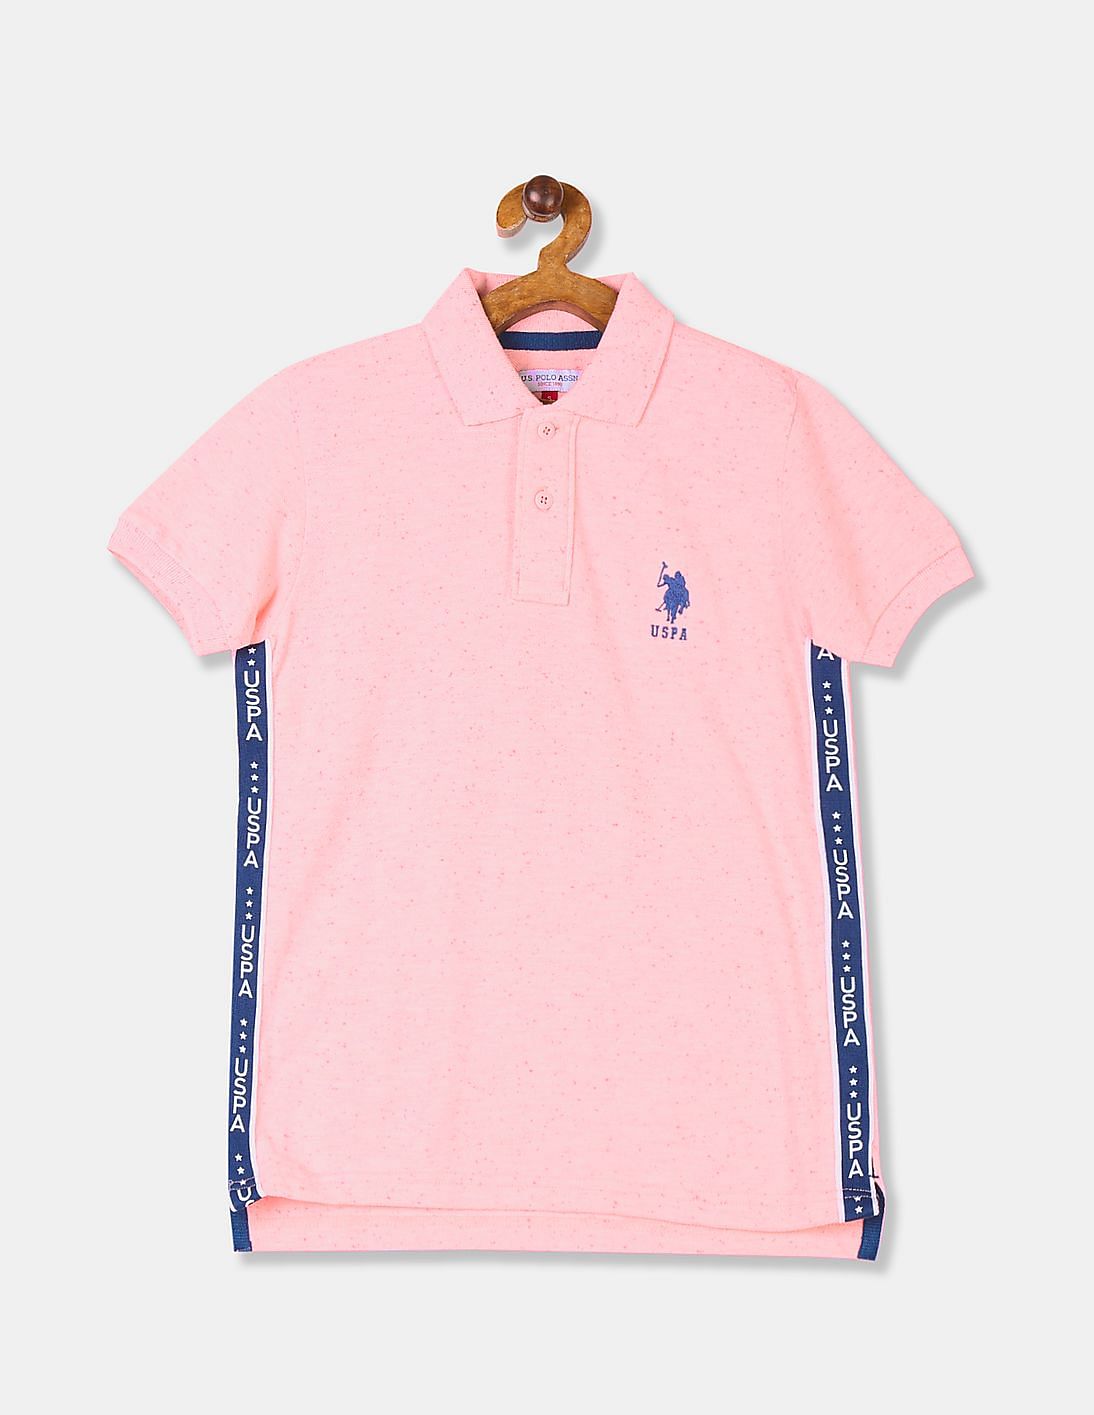 Buy U.S. Polo Assn. Kids Boys Boys Pink Brand Taping Speckled Knit Polo ...